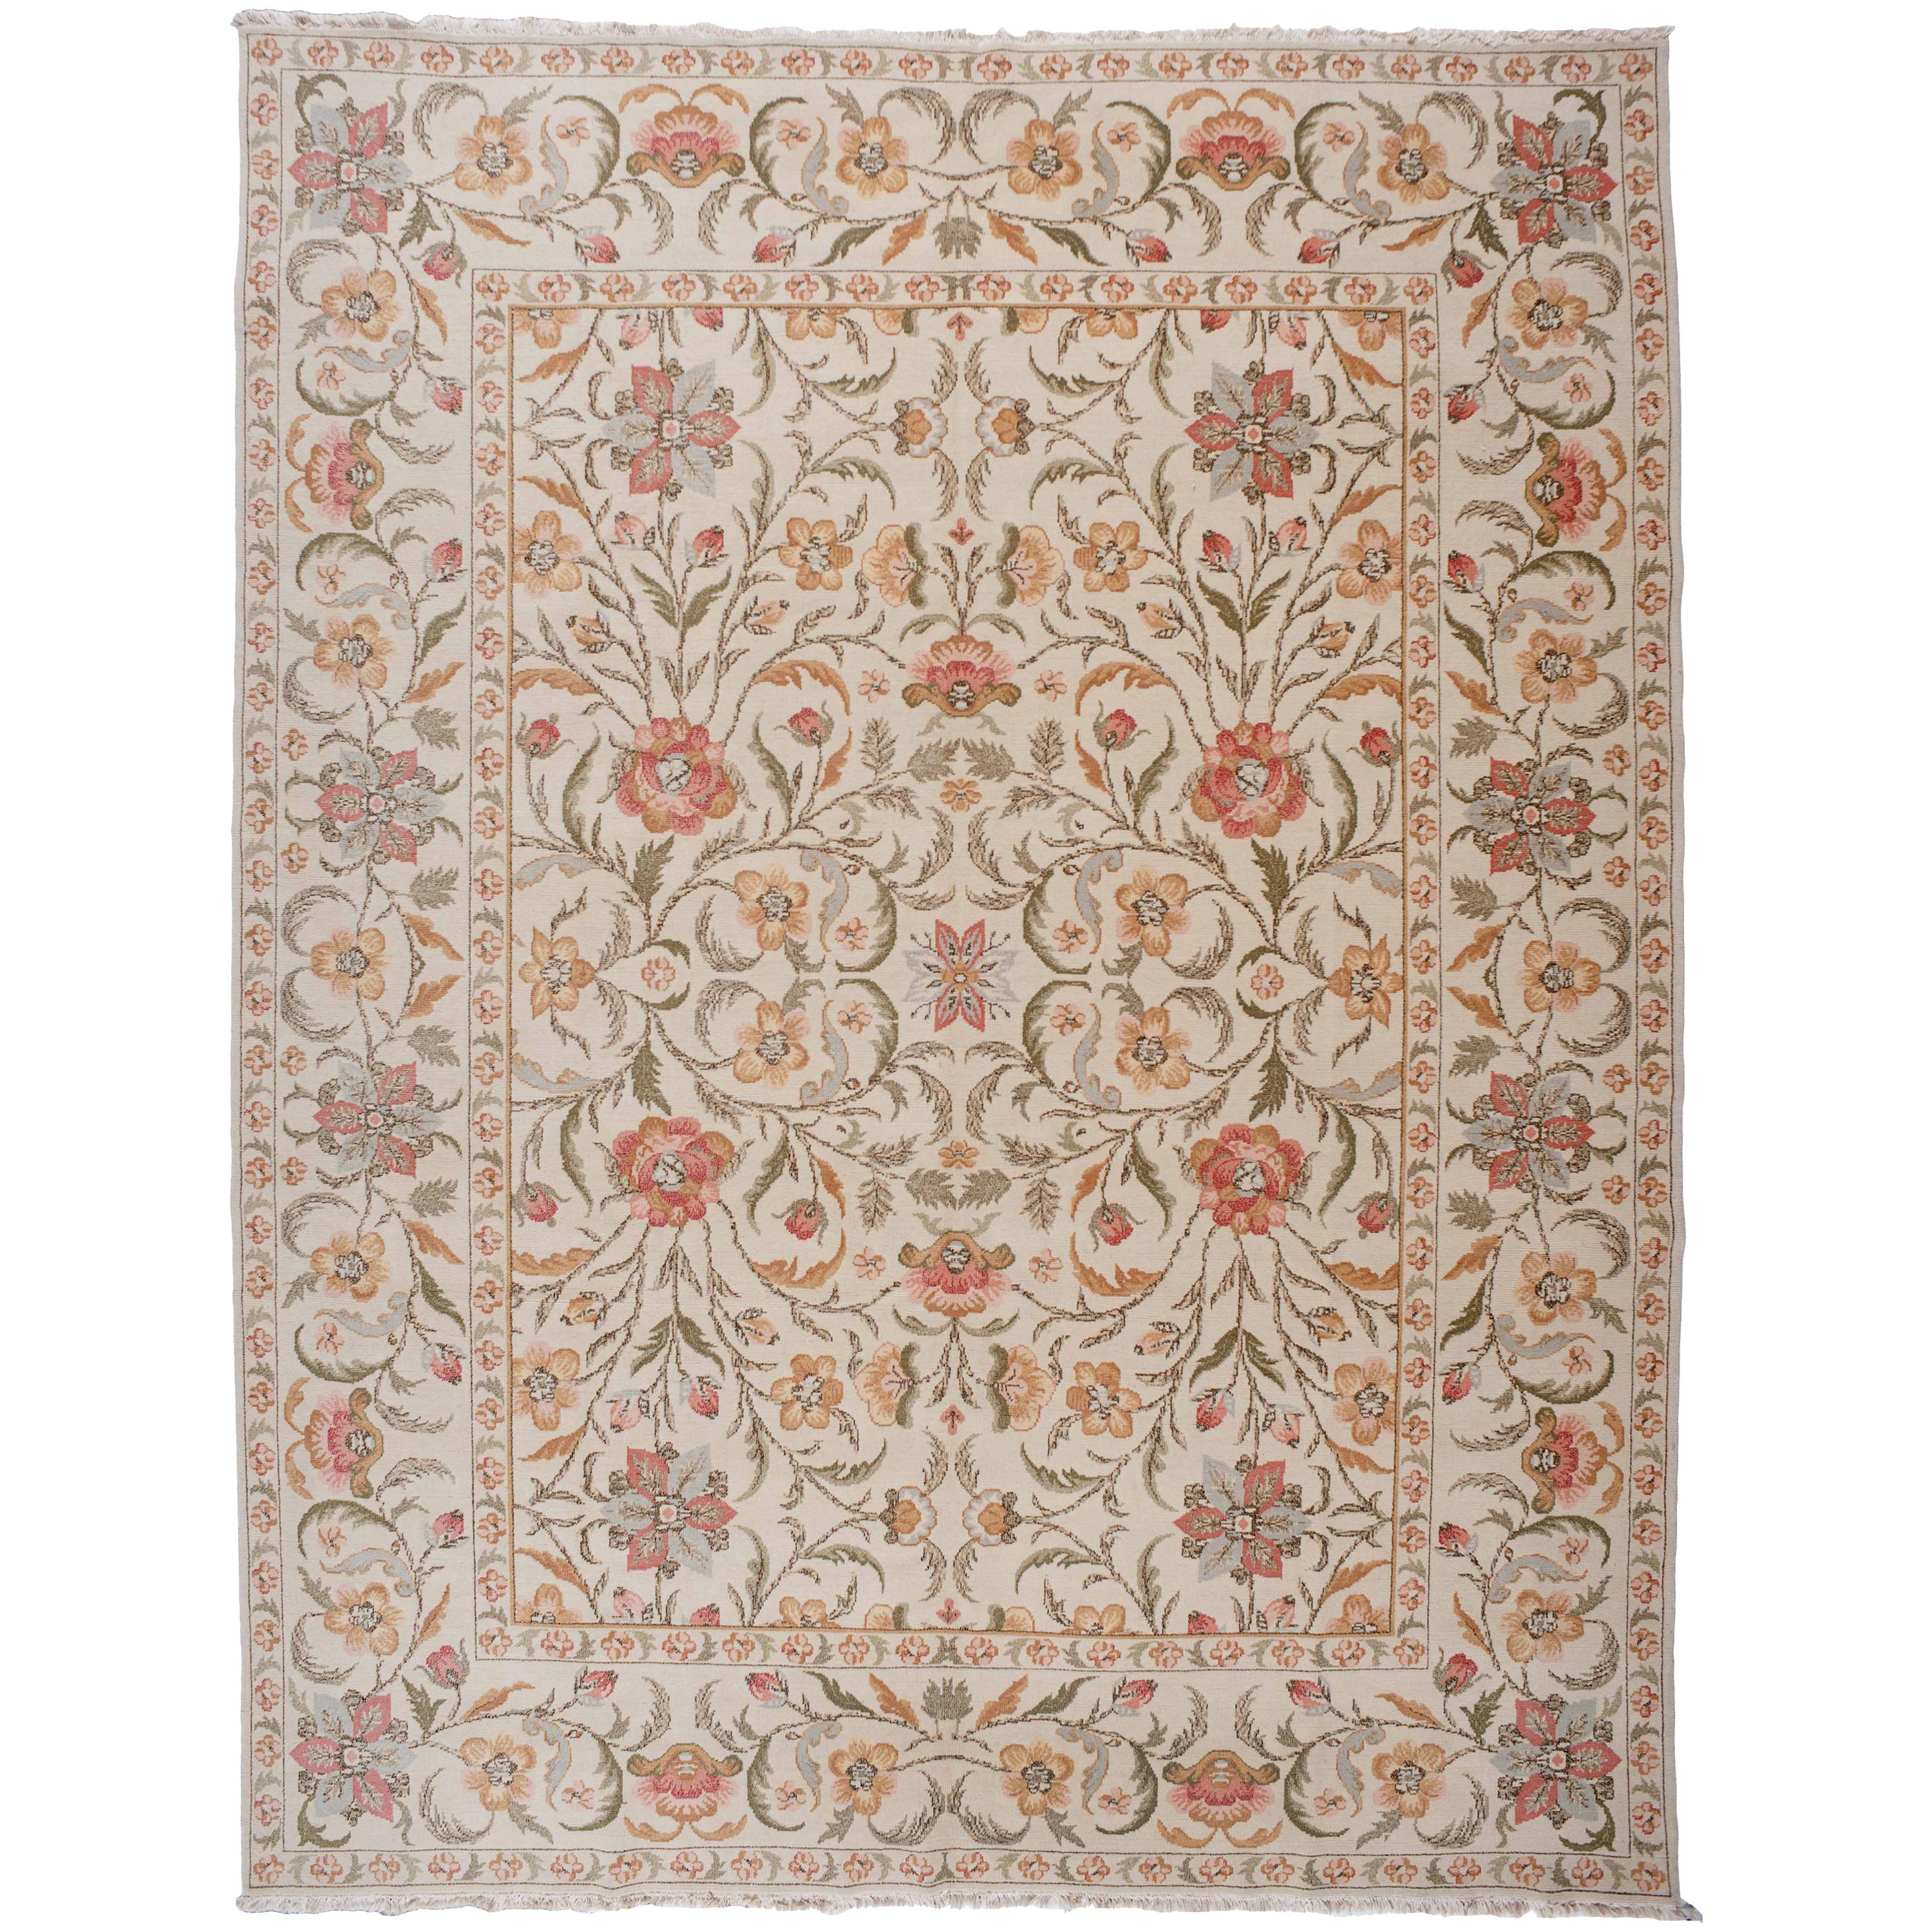 Red, Gold and Silver Floral Pattern Rug